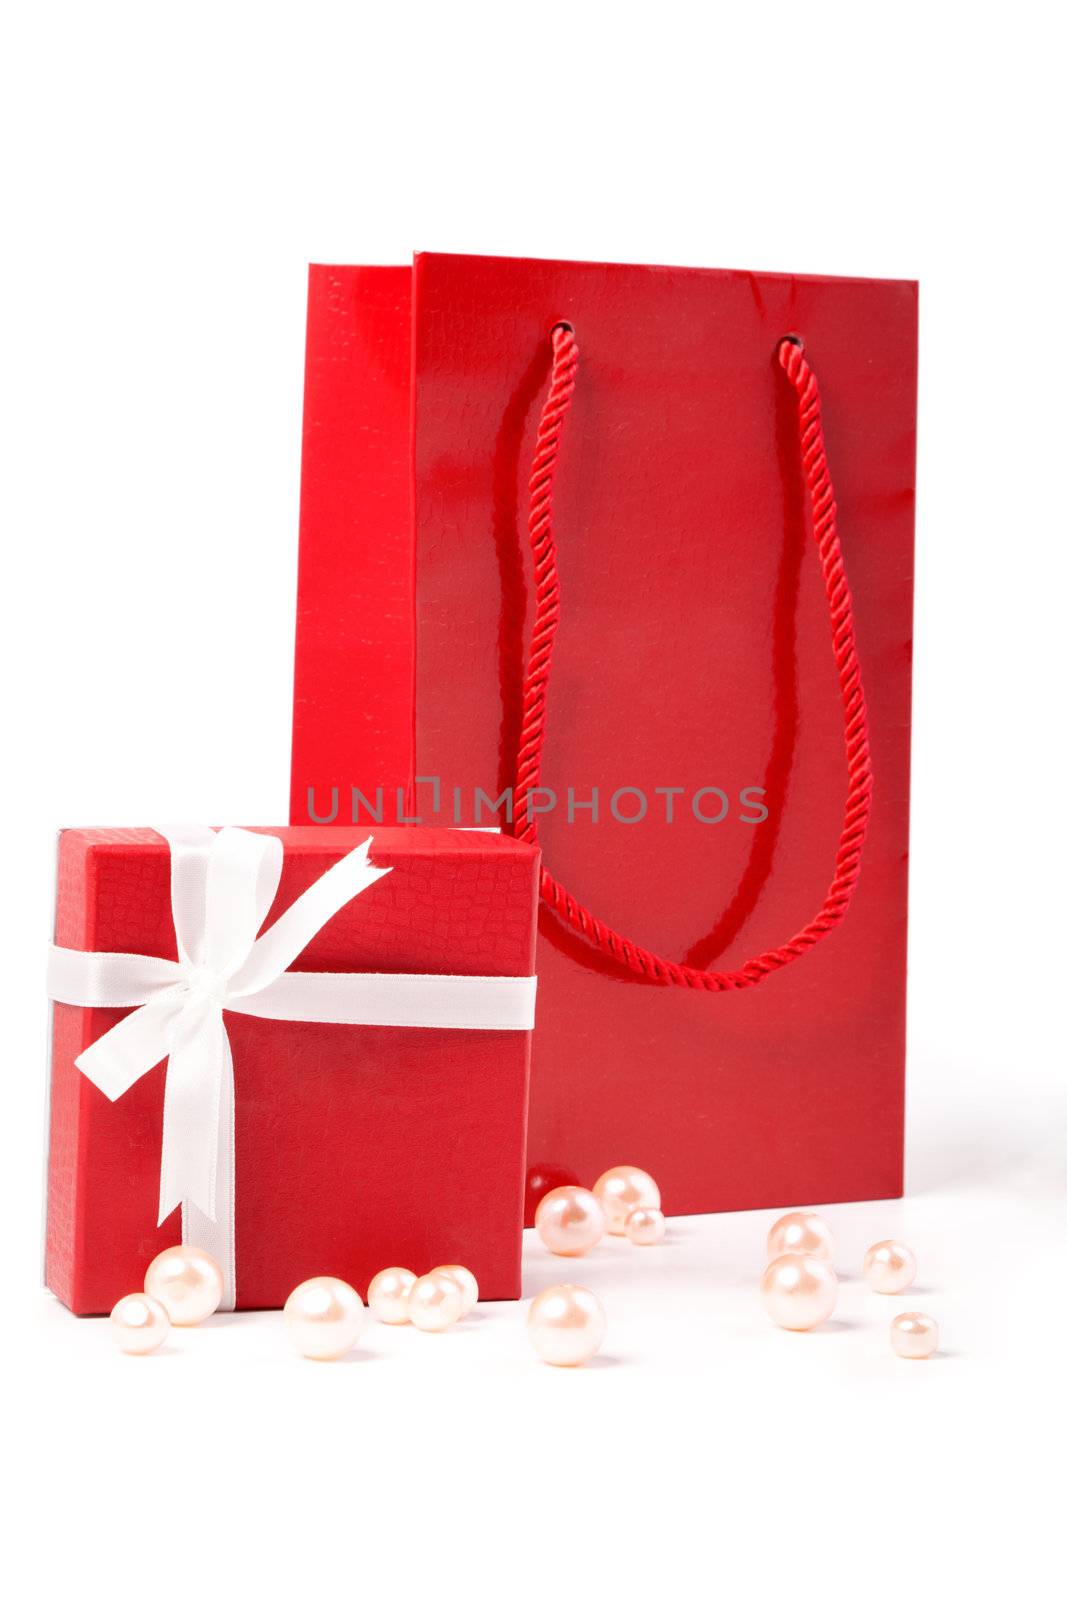 
red gift and Gift bag, isolated on white background  by motorolka